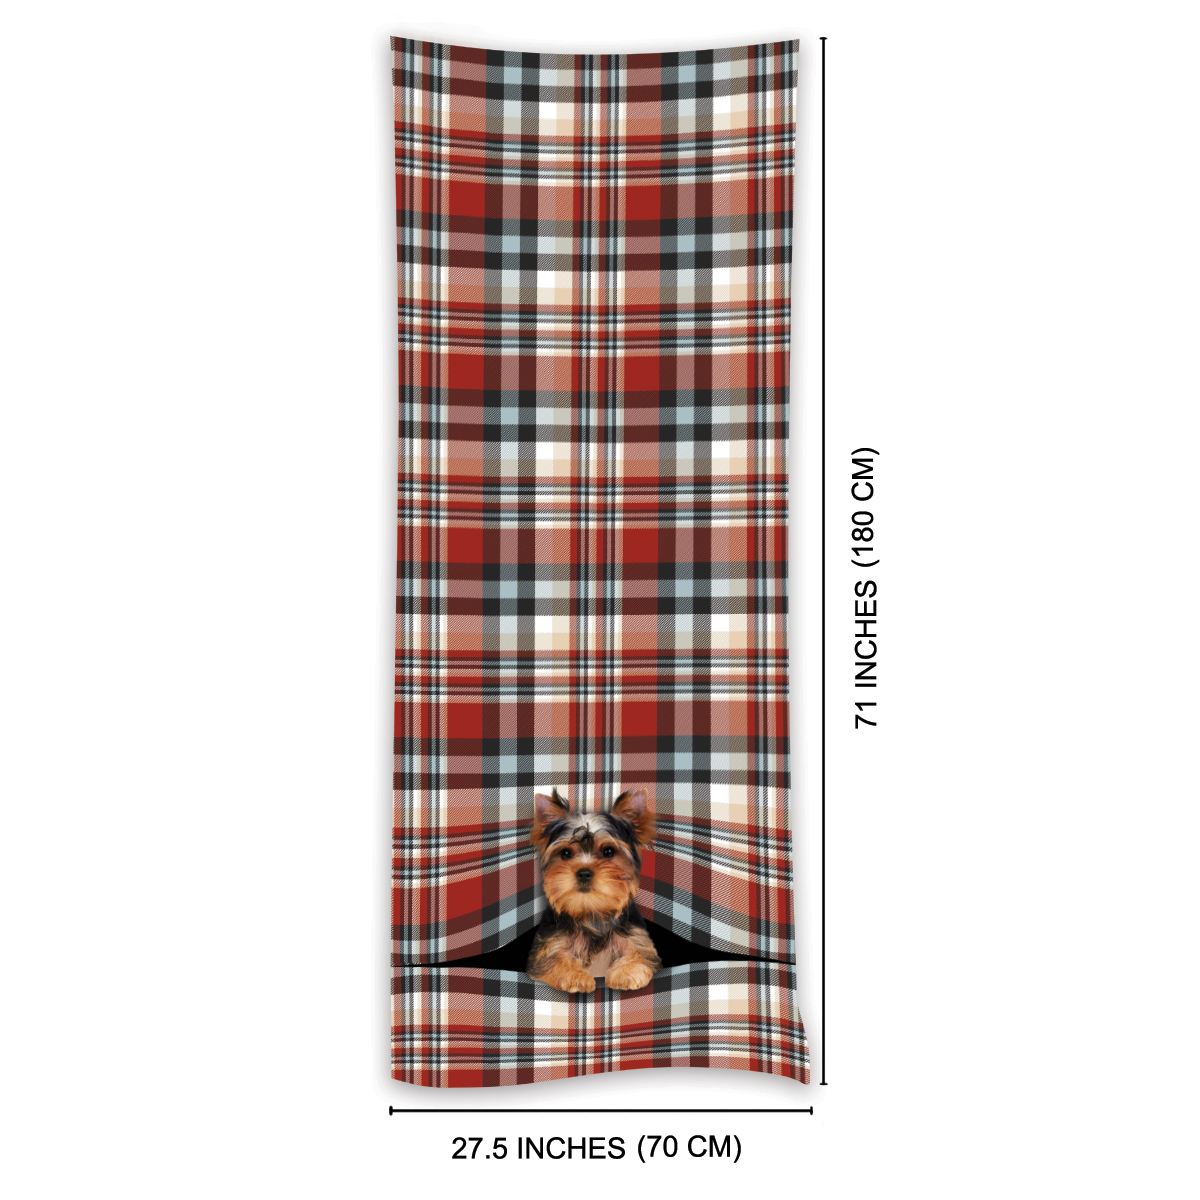 Keep You Warm - Yorkshire Terrier - Scarf V1